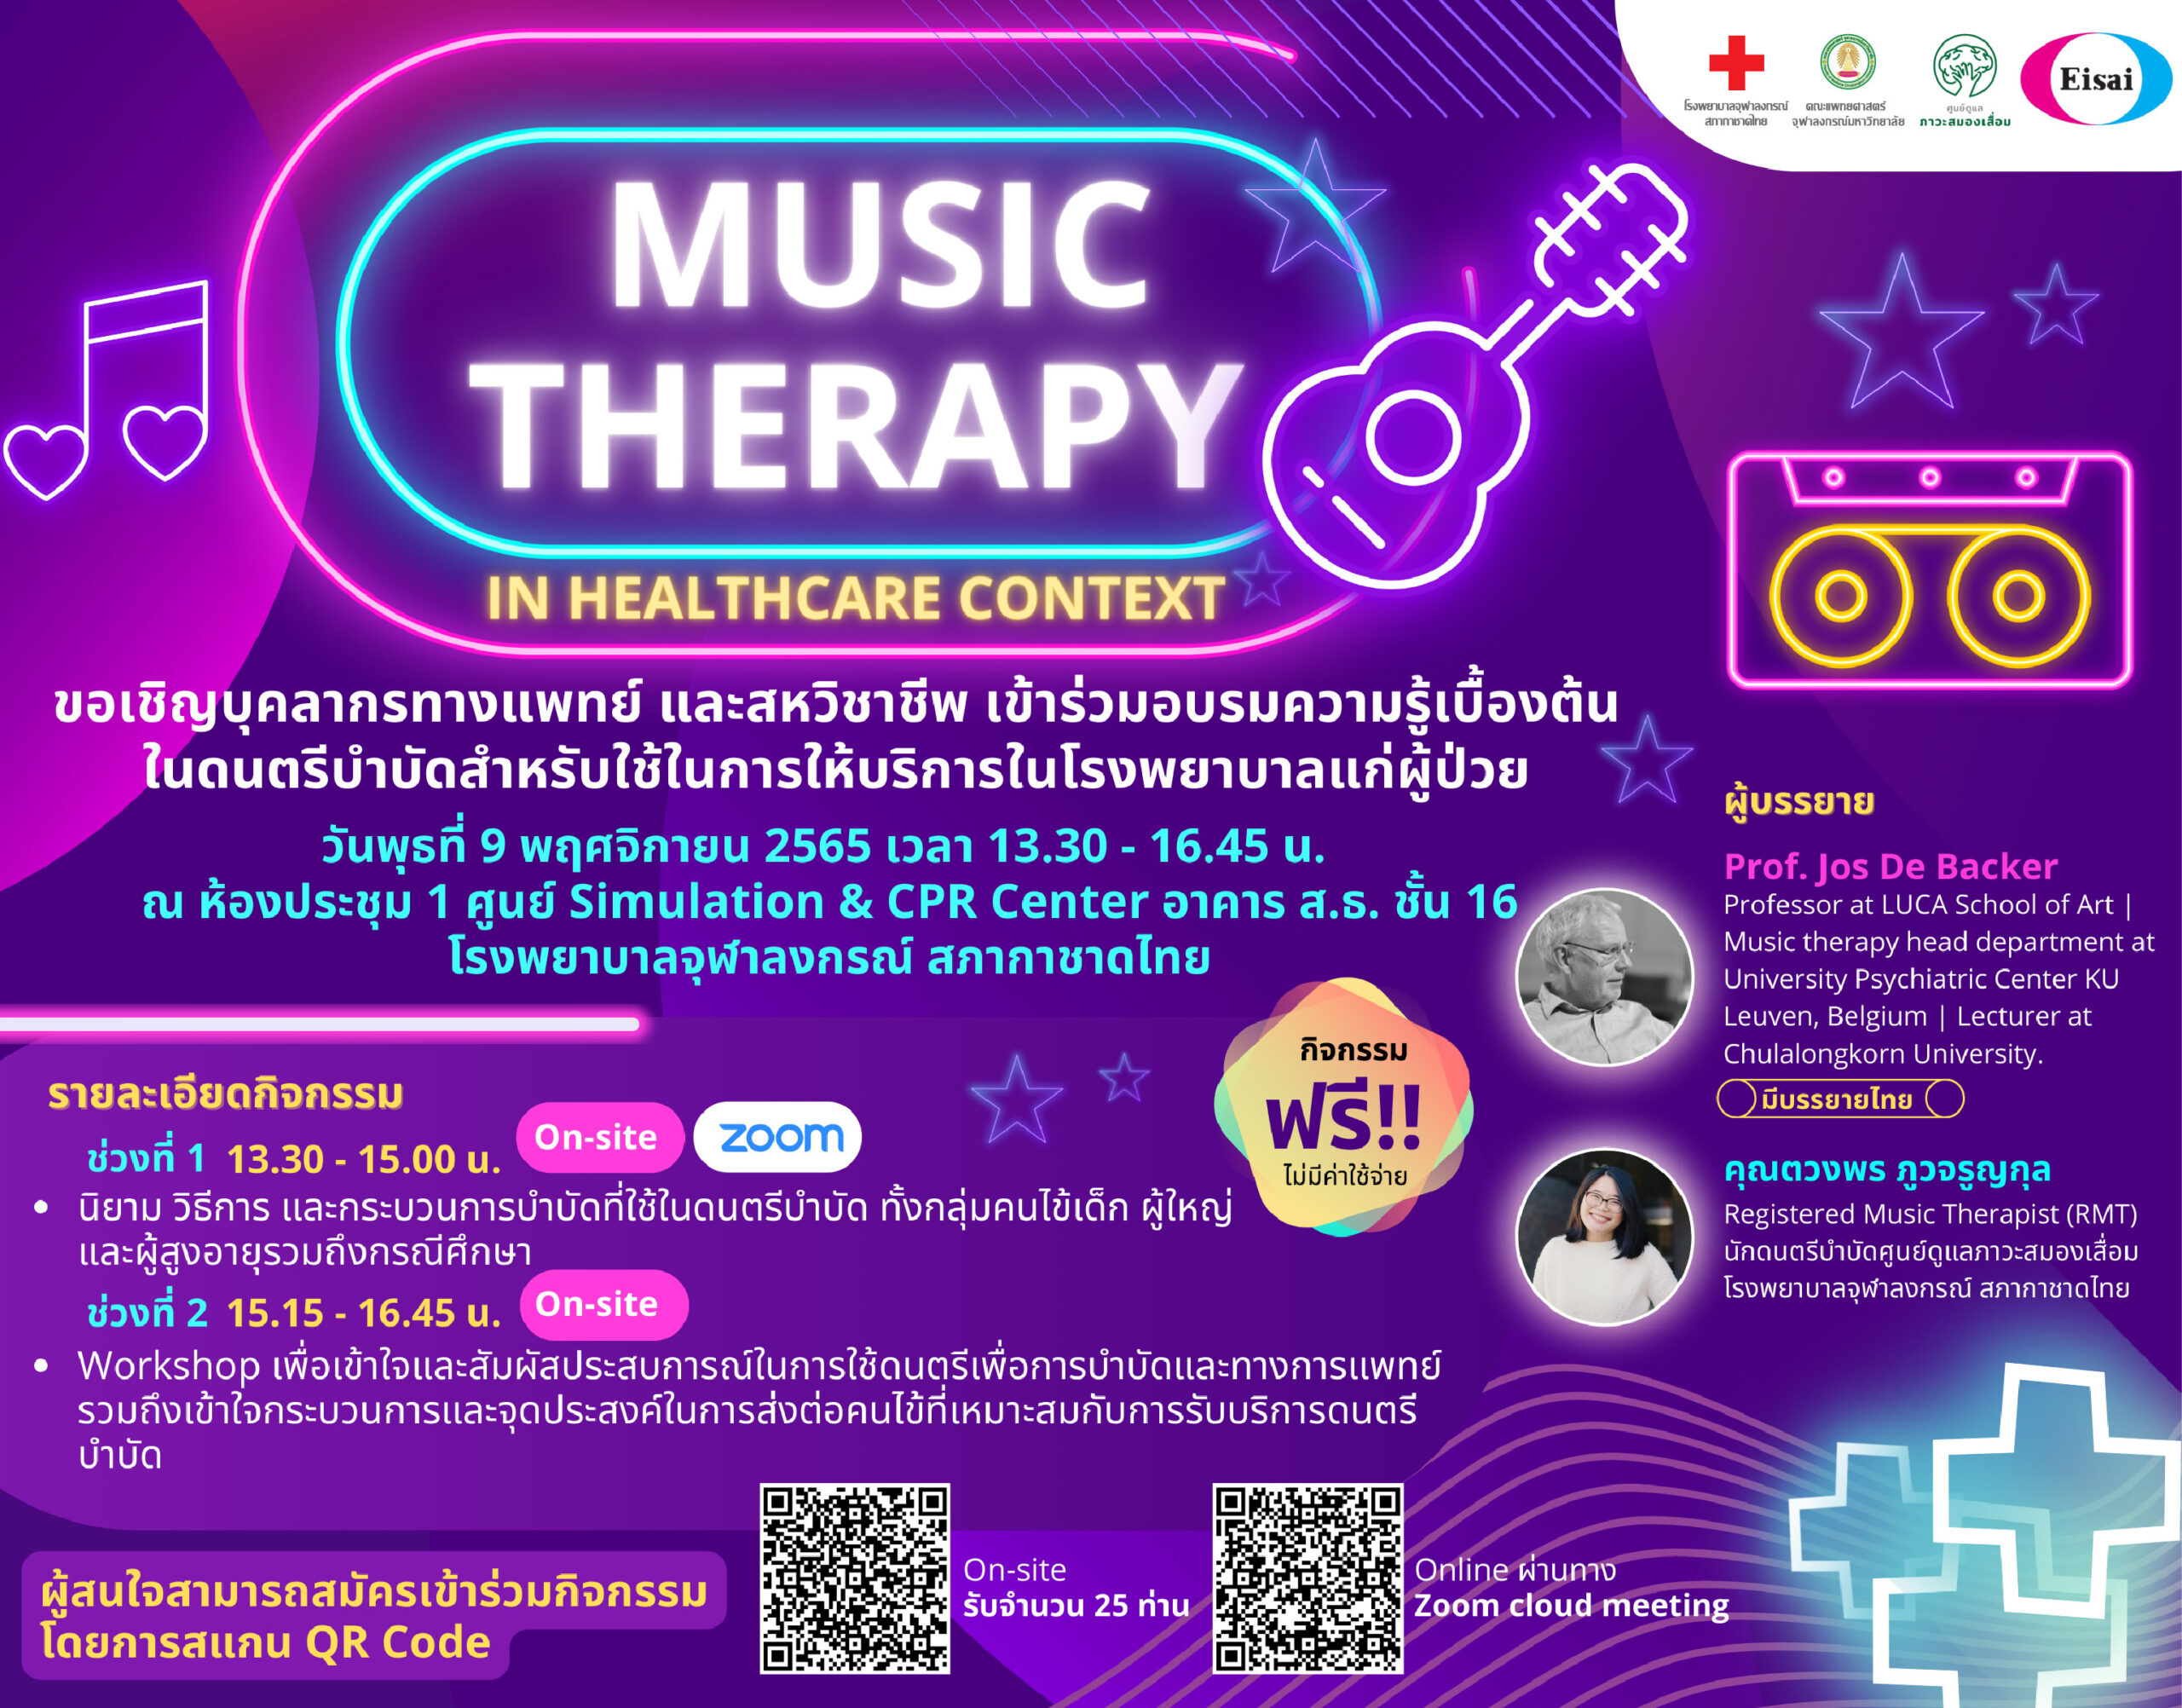 MUSIC THERAPY IN HEALTHCARE CONTEXT